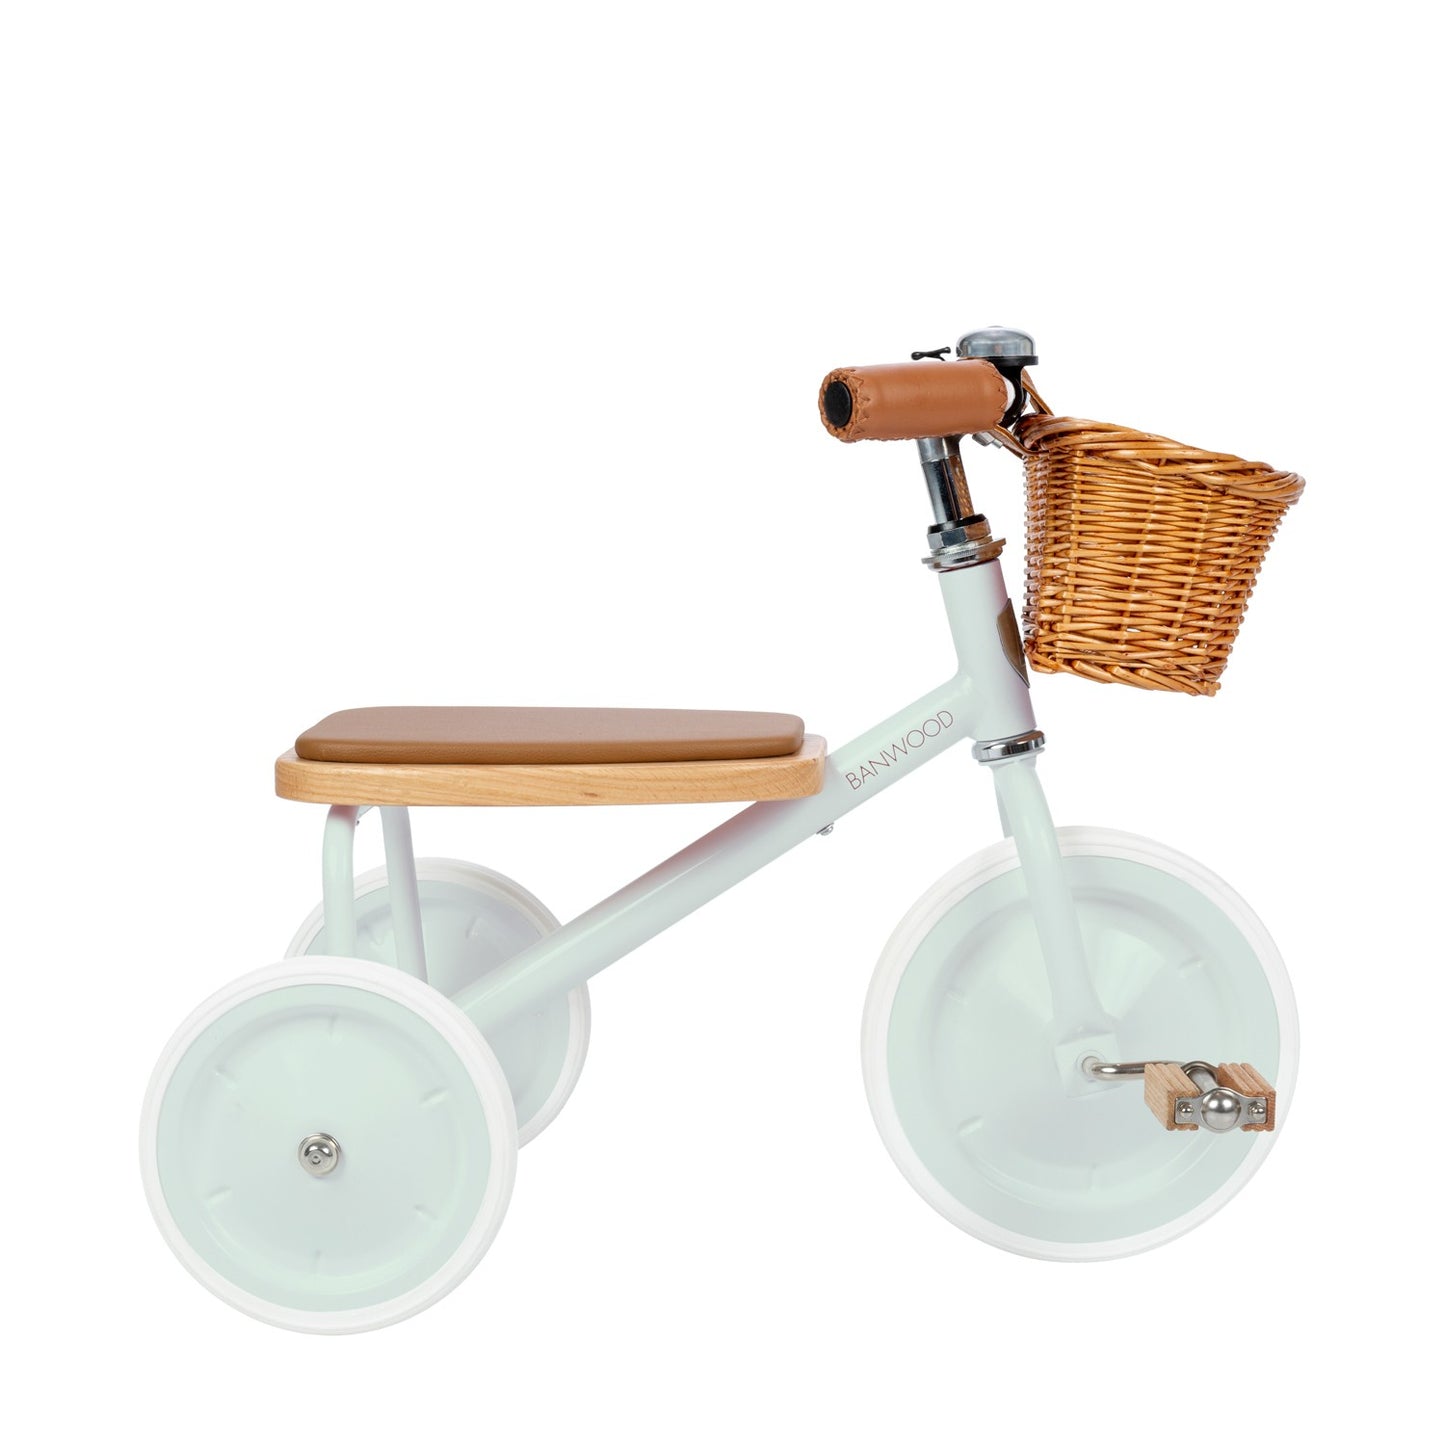 BANWOOD TRICYCLE - Menthe